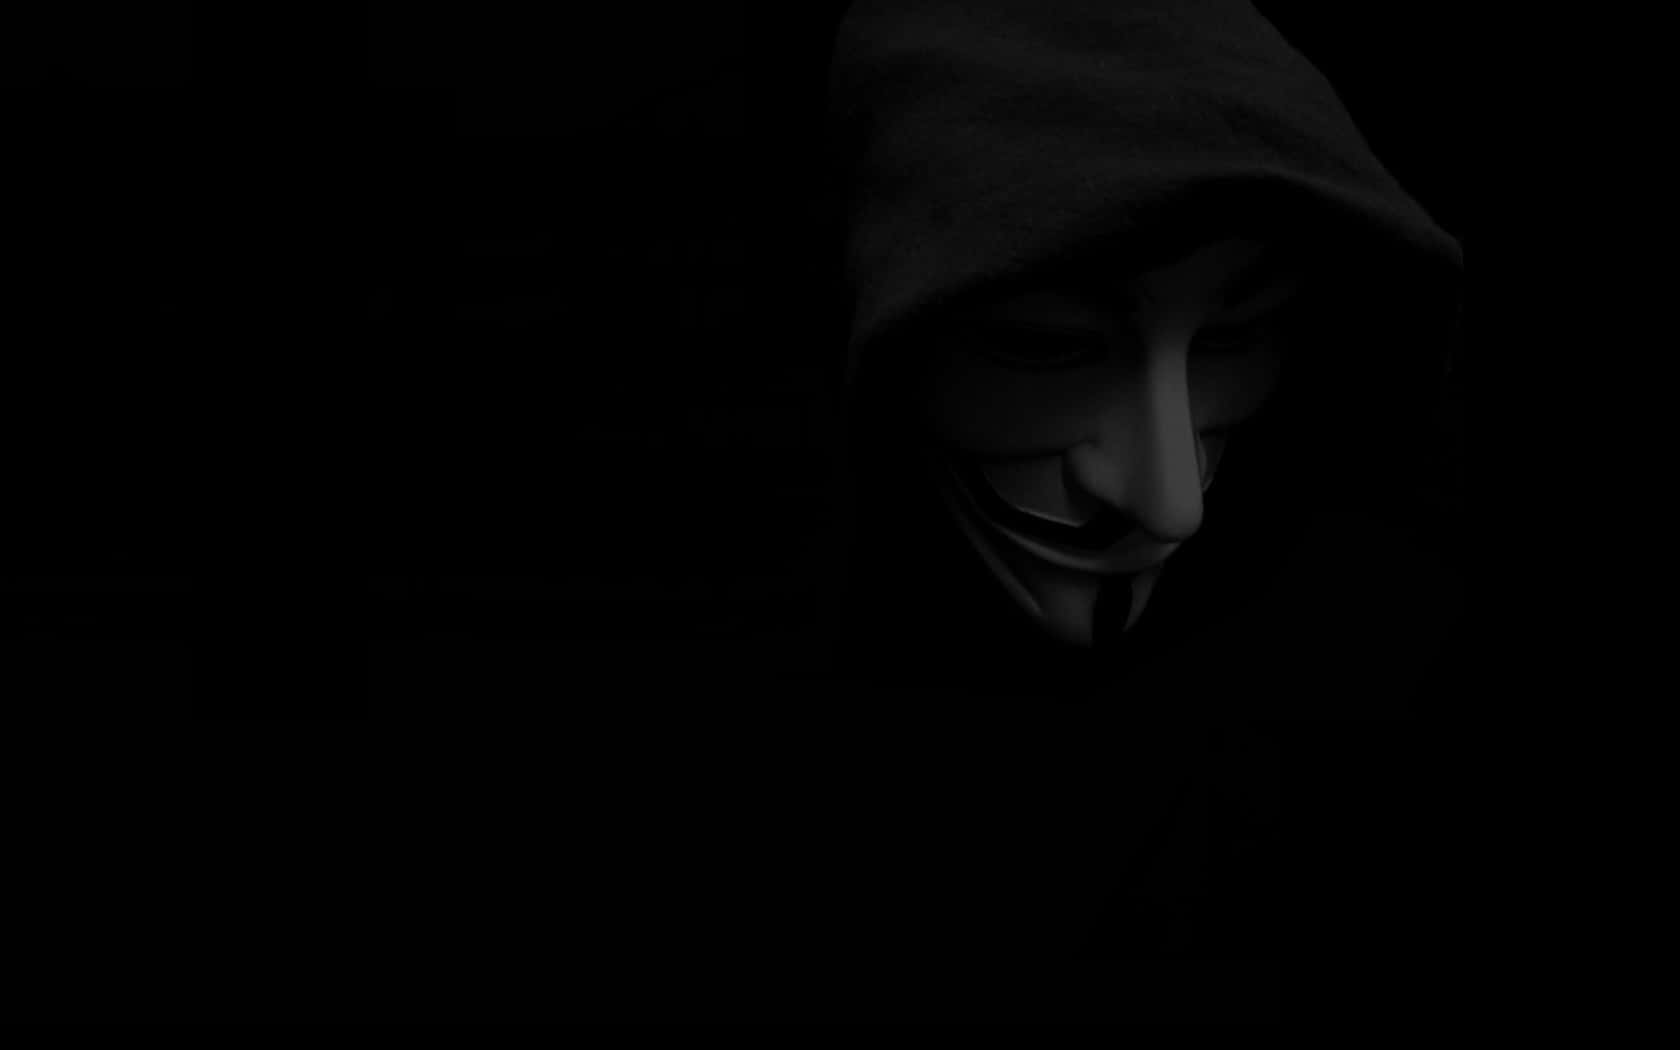 Anonymous figure in the dark, surrounded by matrix code